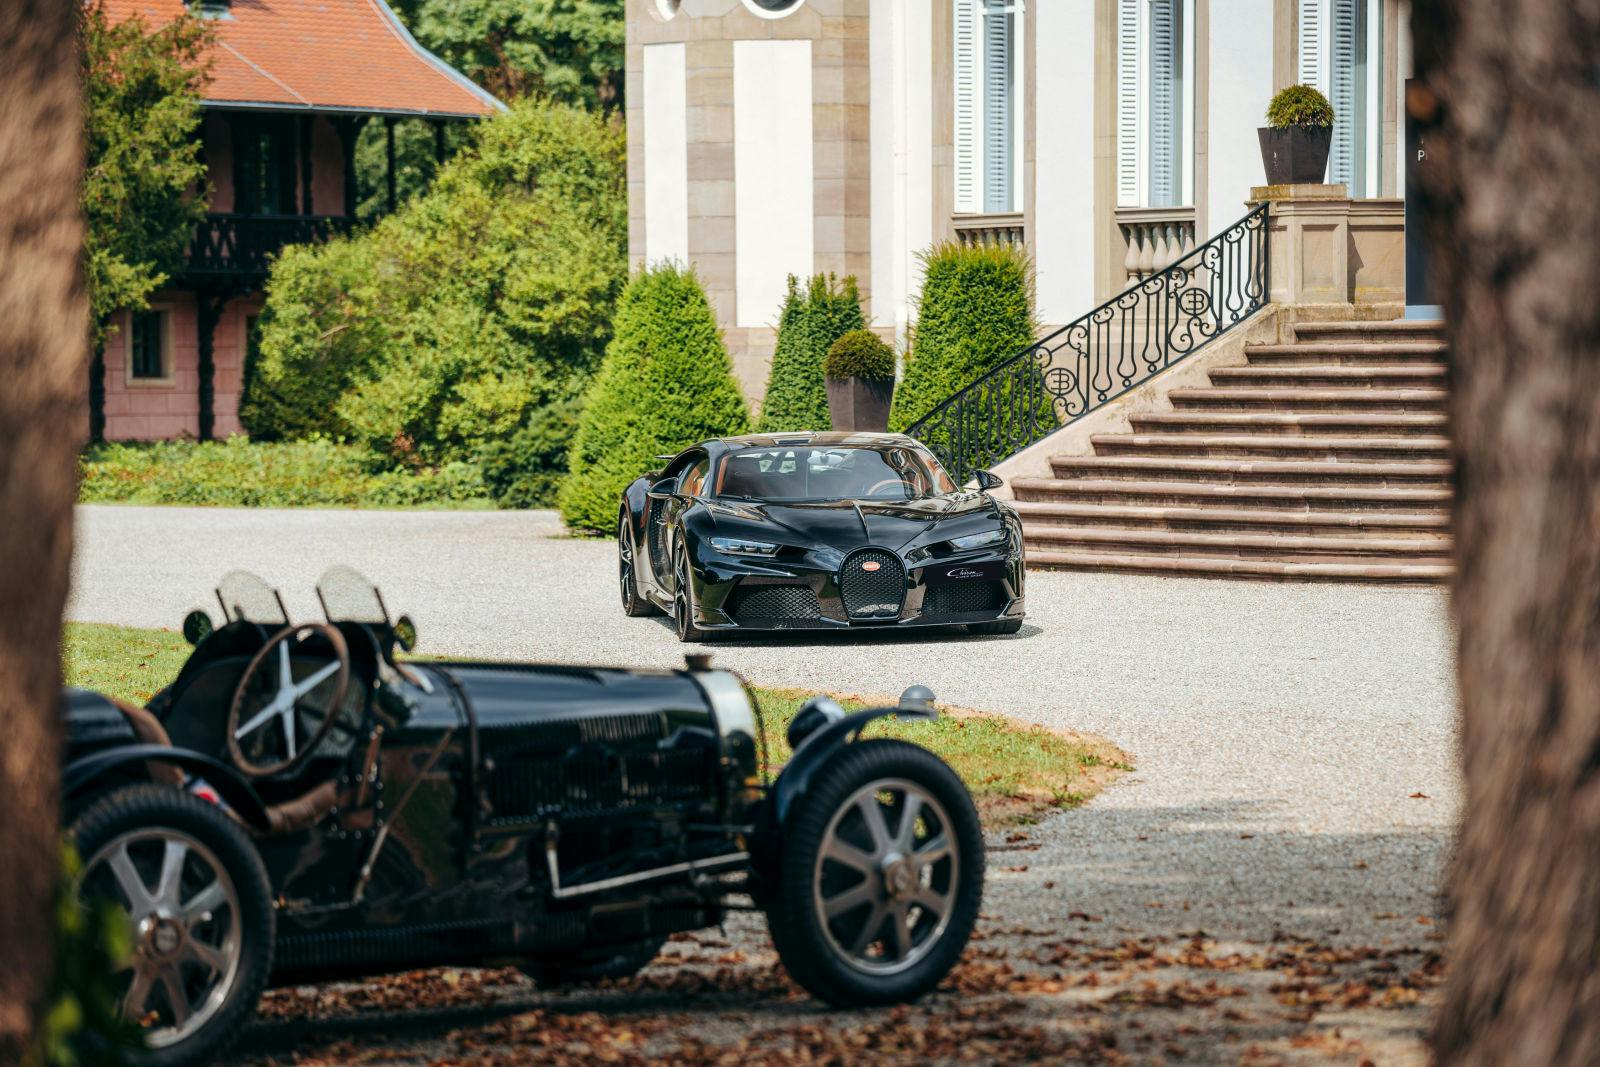 Guests immersed in the heritage of the brand from historic vehicles to modern cars.